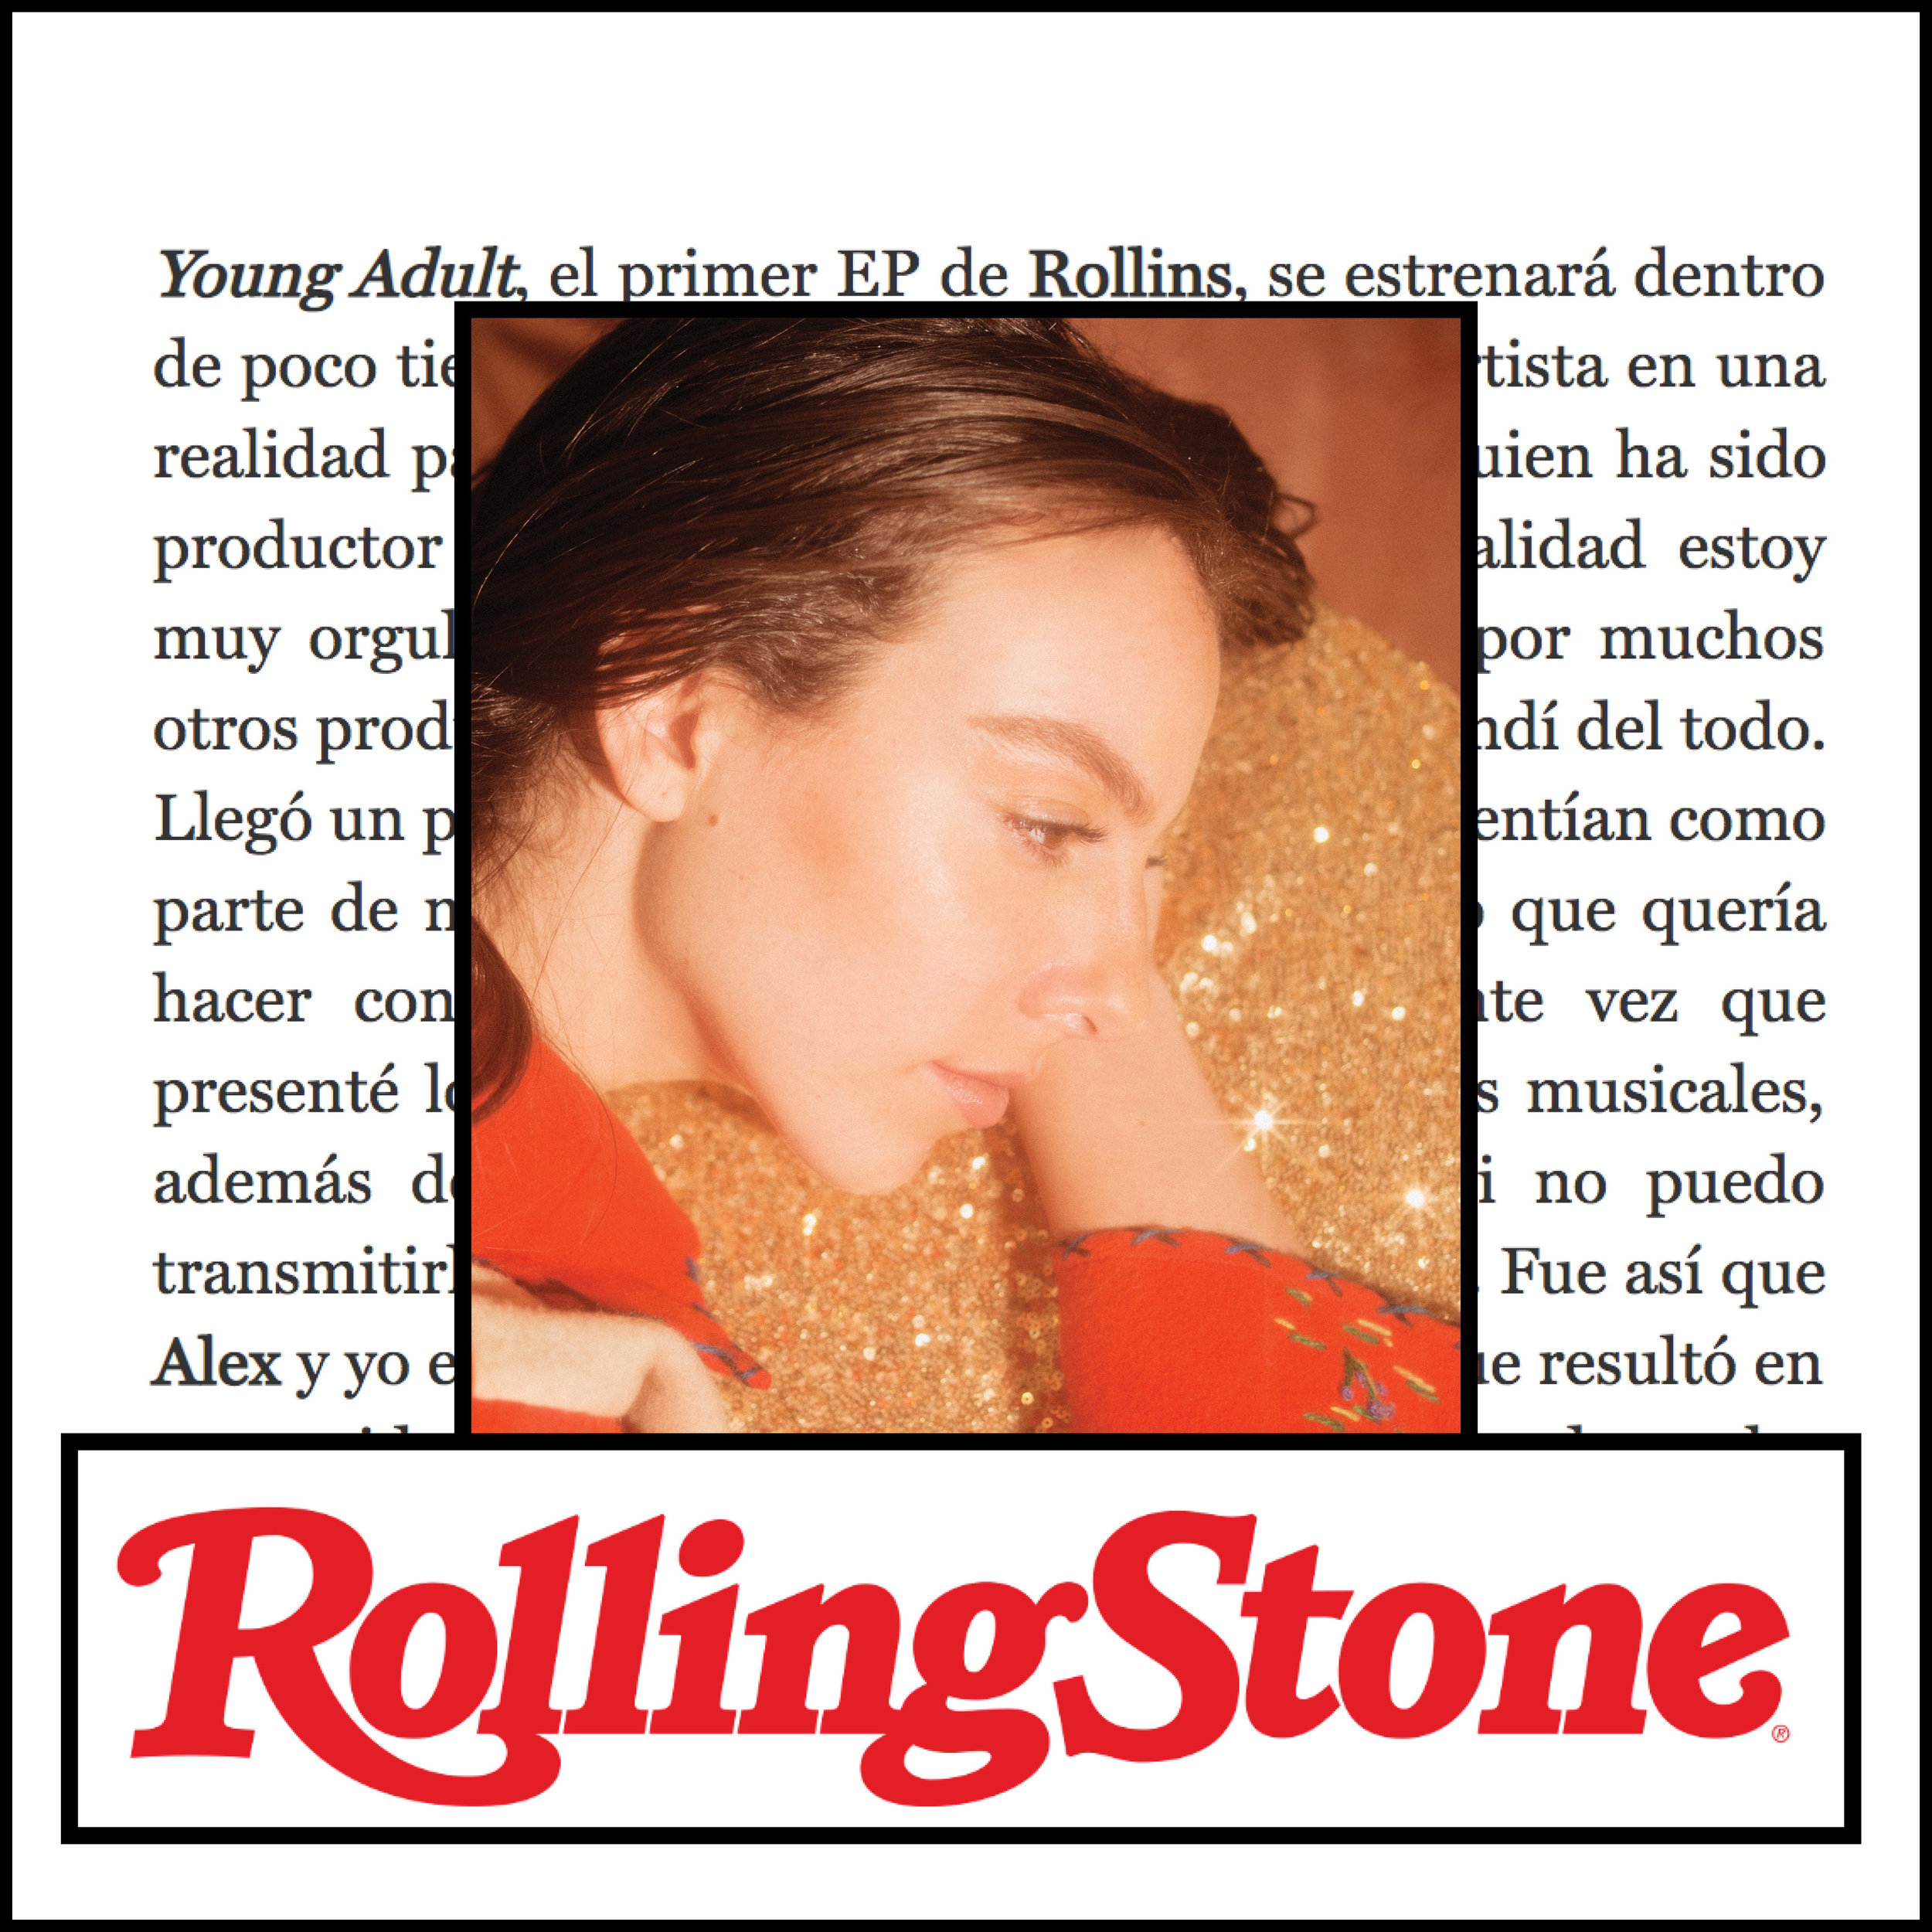  Link -  Rolling Stone  